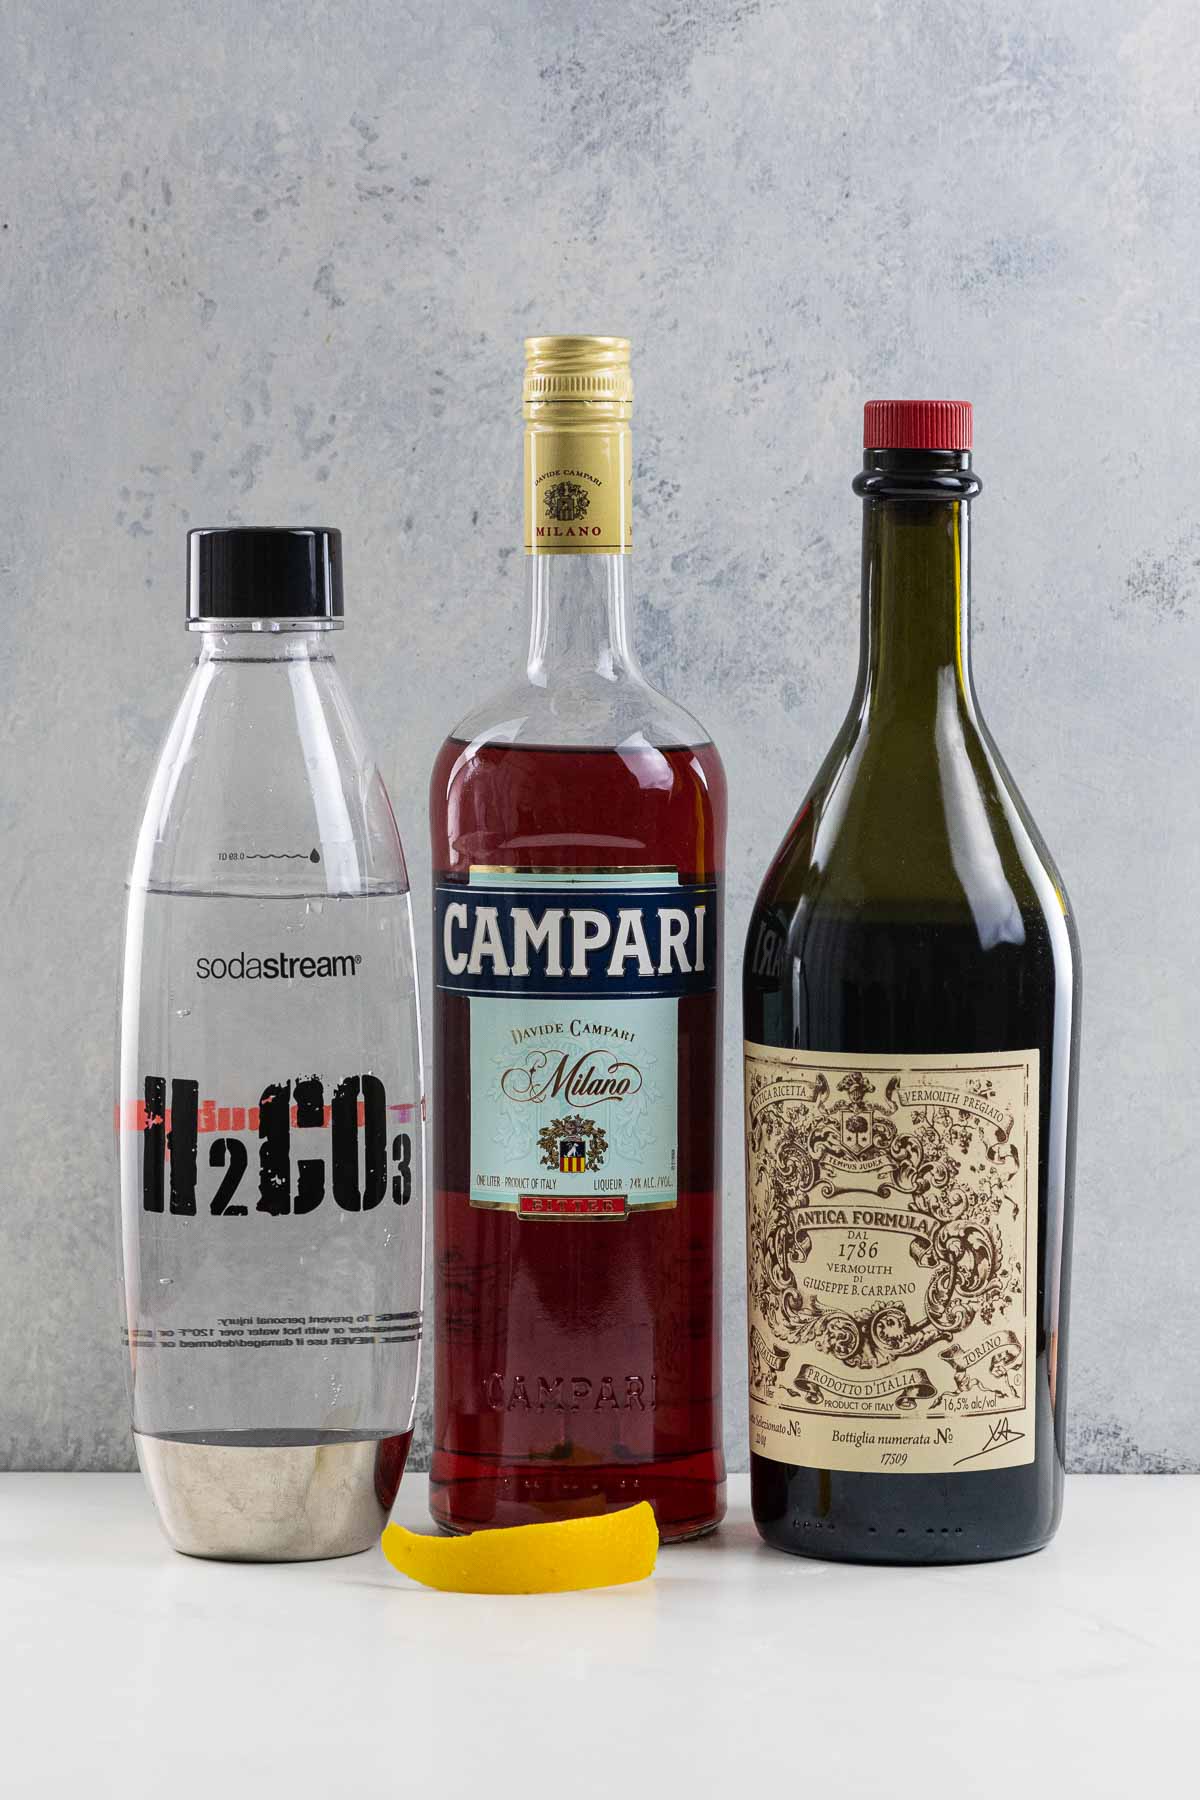 ingredients for an Americano cocktail (campari, carpano antica sweet vermouth, soda water, and an orange twist)